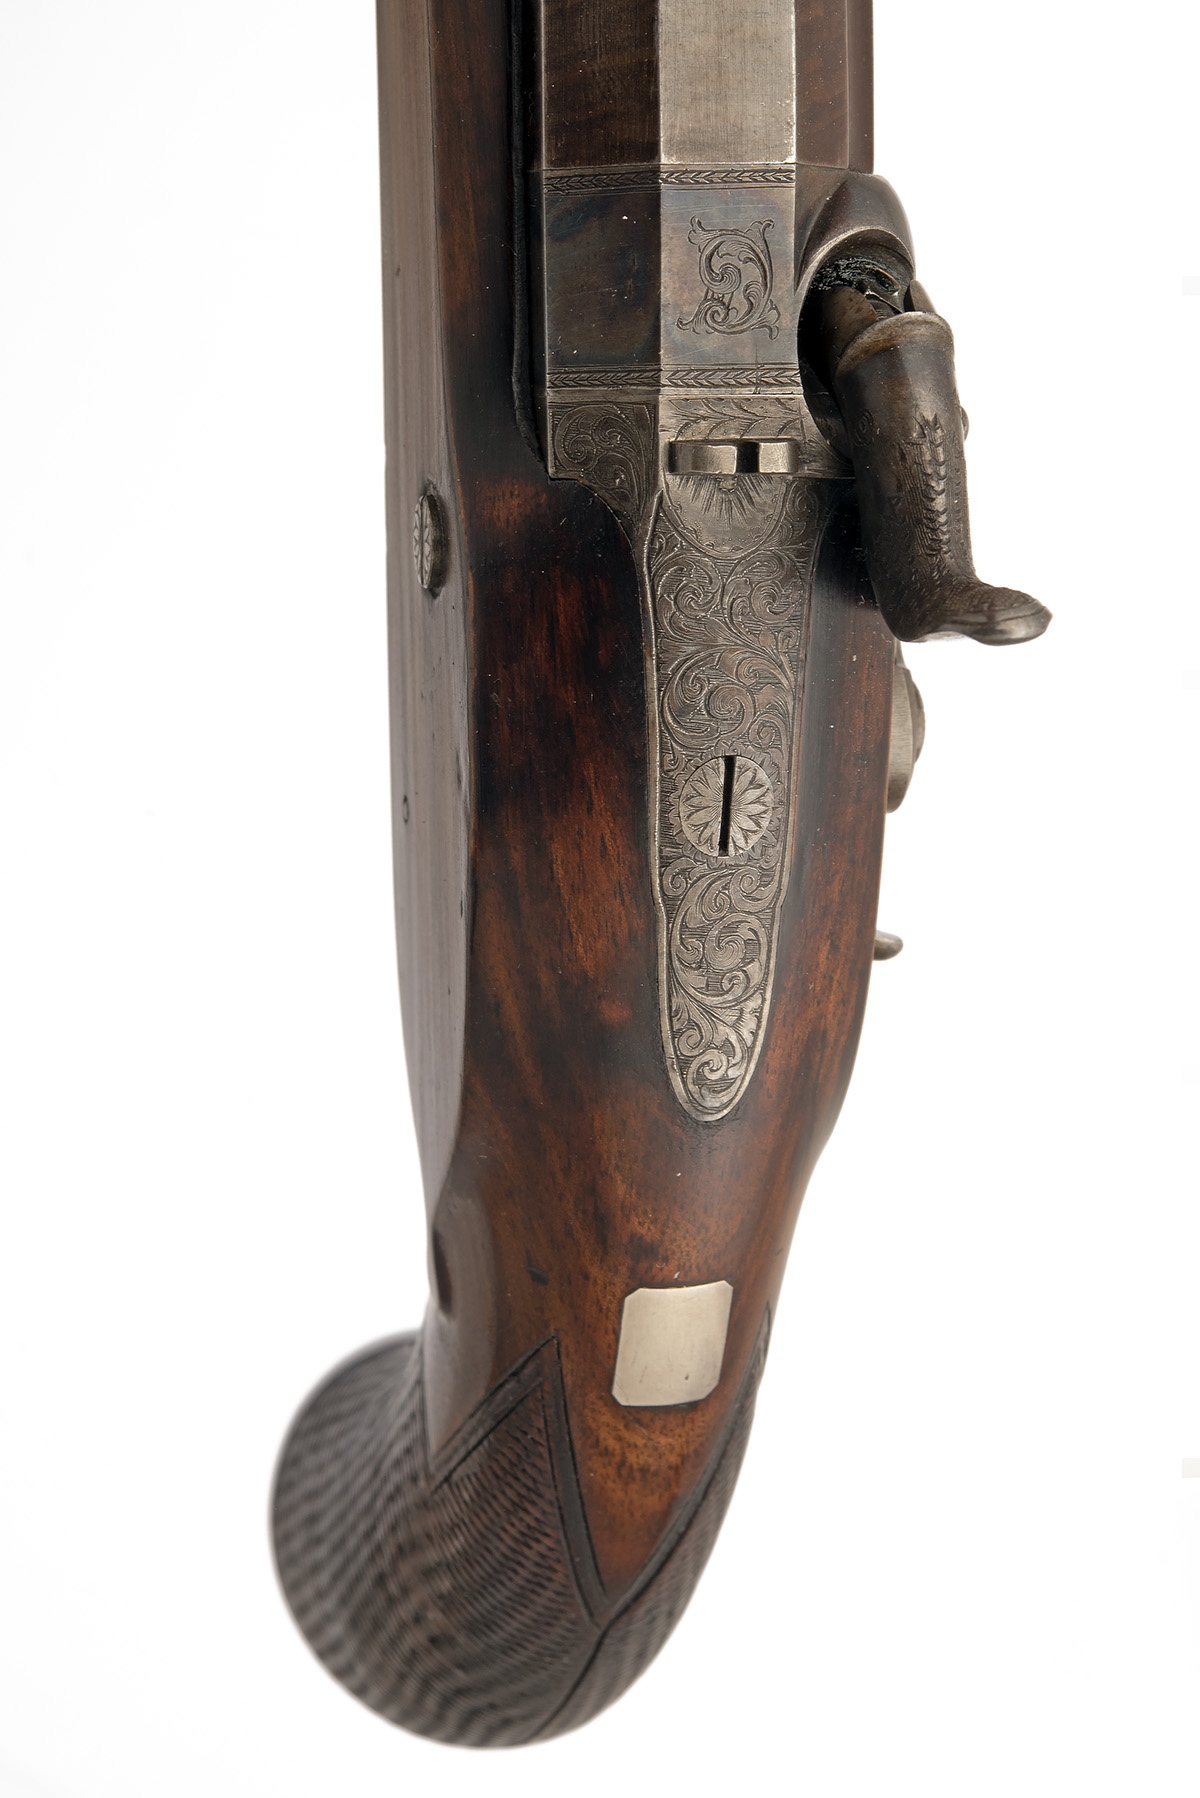 A GOOD CASED PAIR OF .650 PERCUSSION OFFICER'S PISTOLS SIGNED T. MURCOTT, serial numbered 439, circa - Image 12 of 15